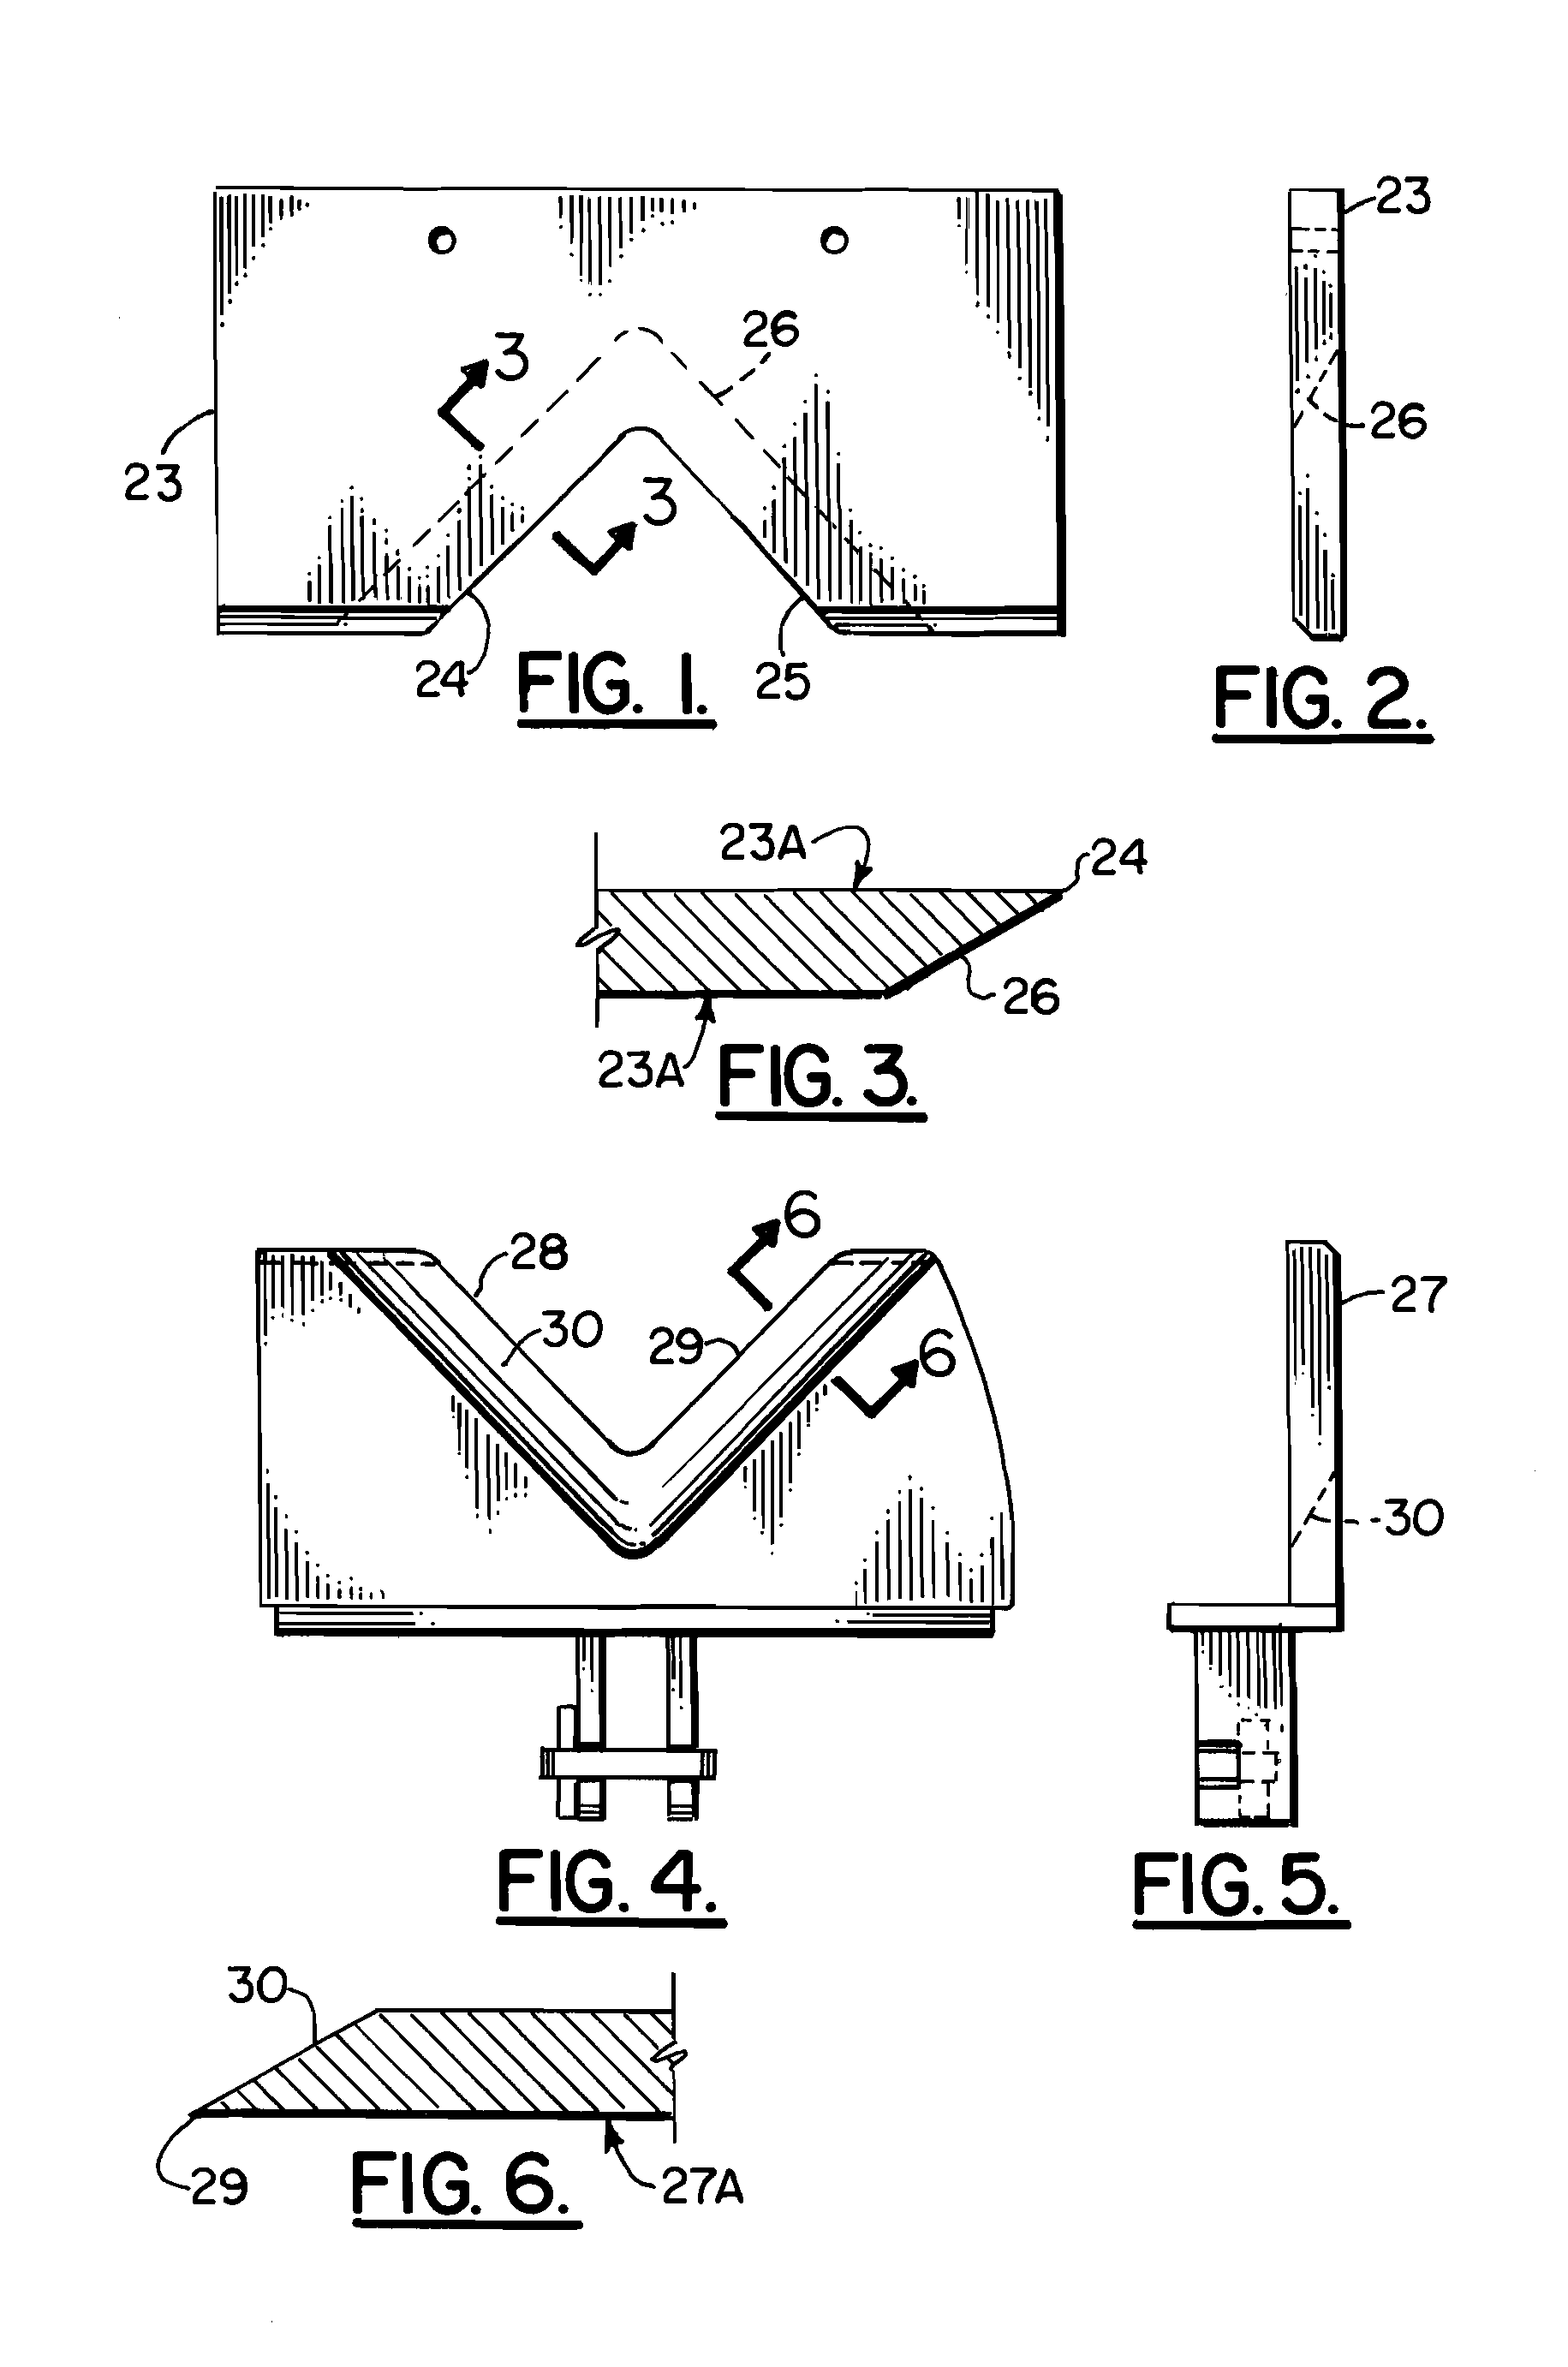 Method and apparatus for salvaging underwater pipelines